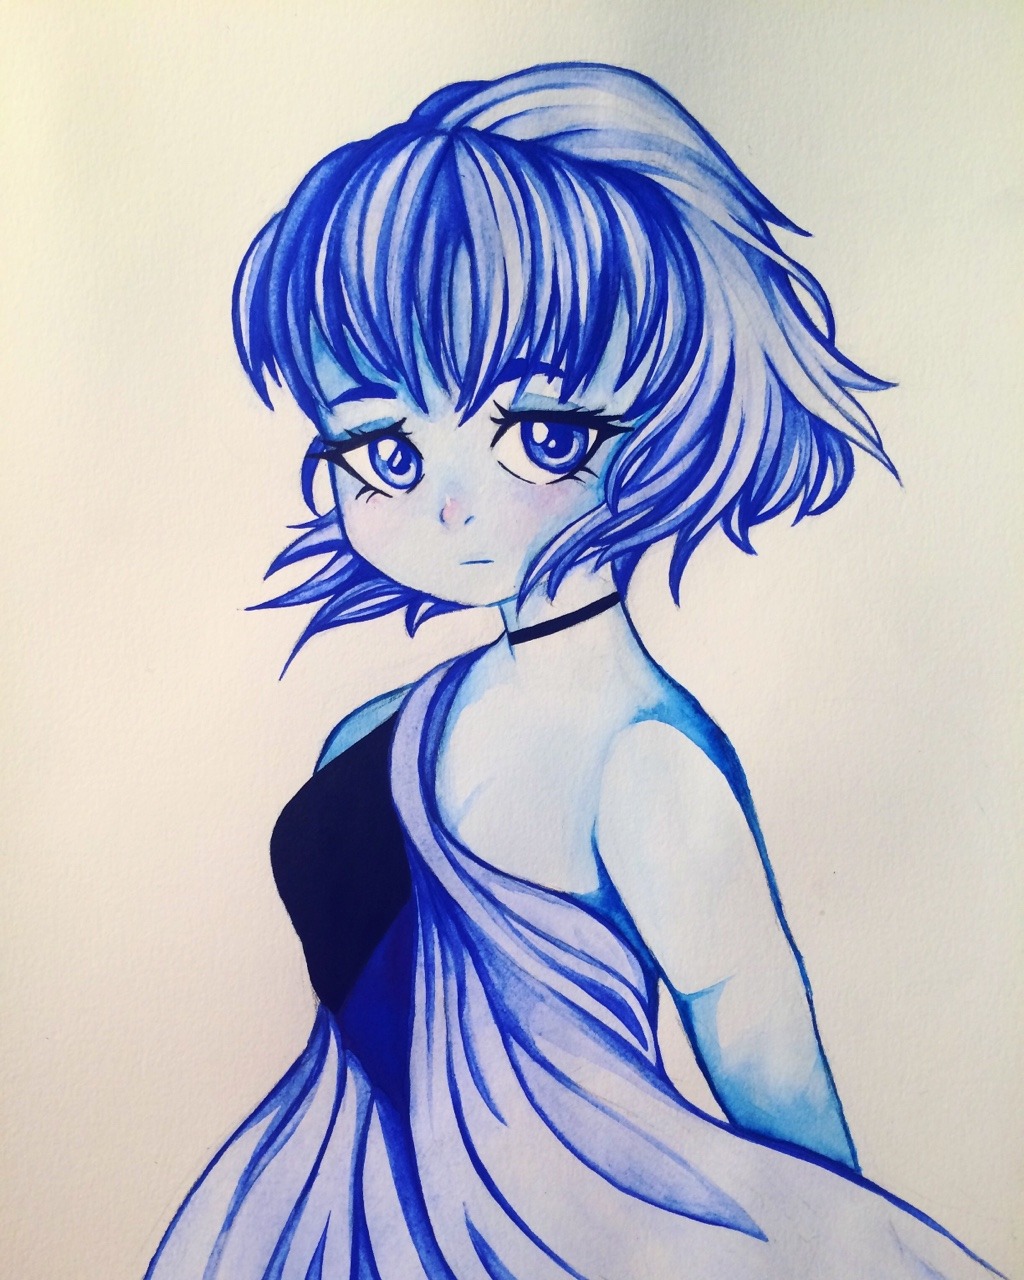 I felt like drawing lapis lazuli from Steven universe but try to draw her again one day because I think I could do better